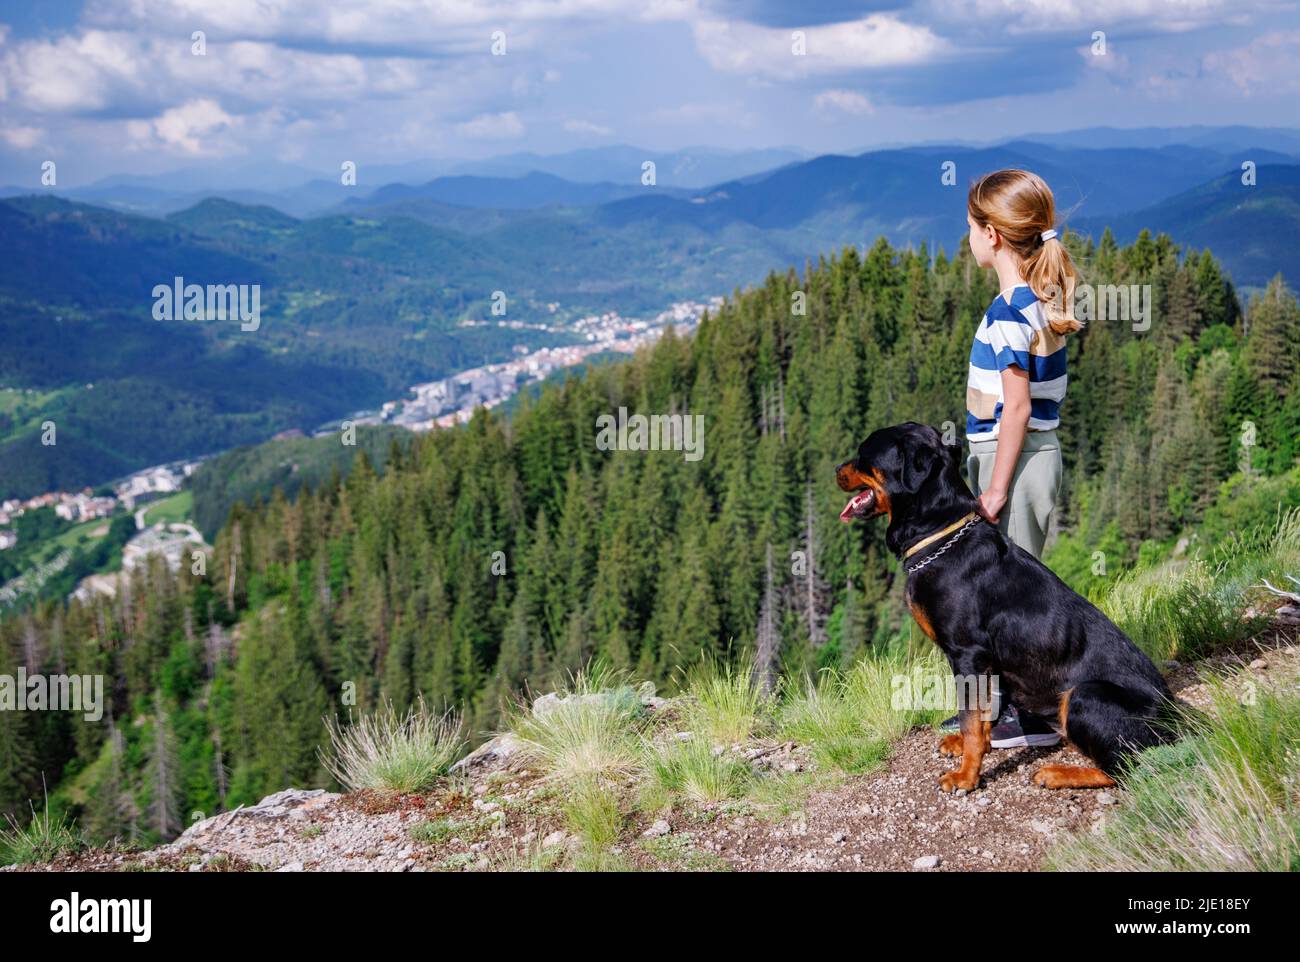 A little pensive dreamy girl with blond hair stands next to her big obedient faithful dog of the Rottweiler breed on a high rocky peak with mountain v Stock Photo